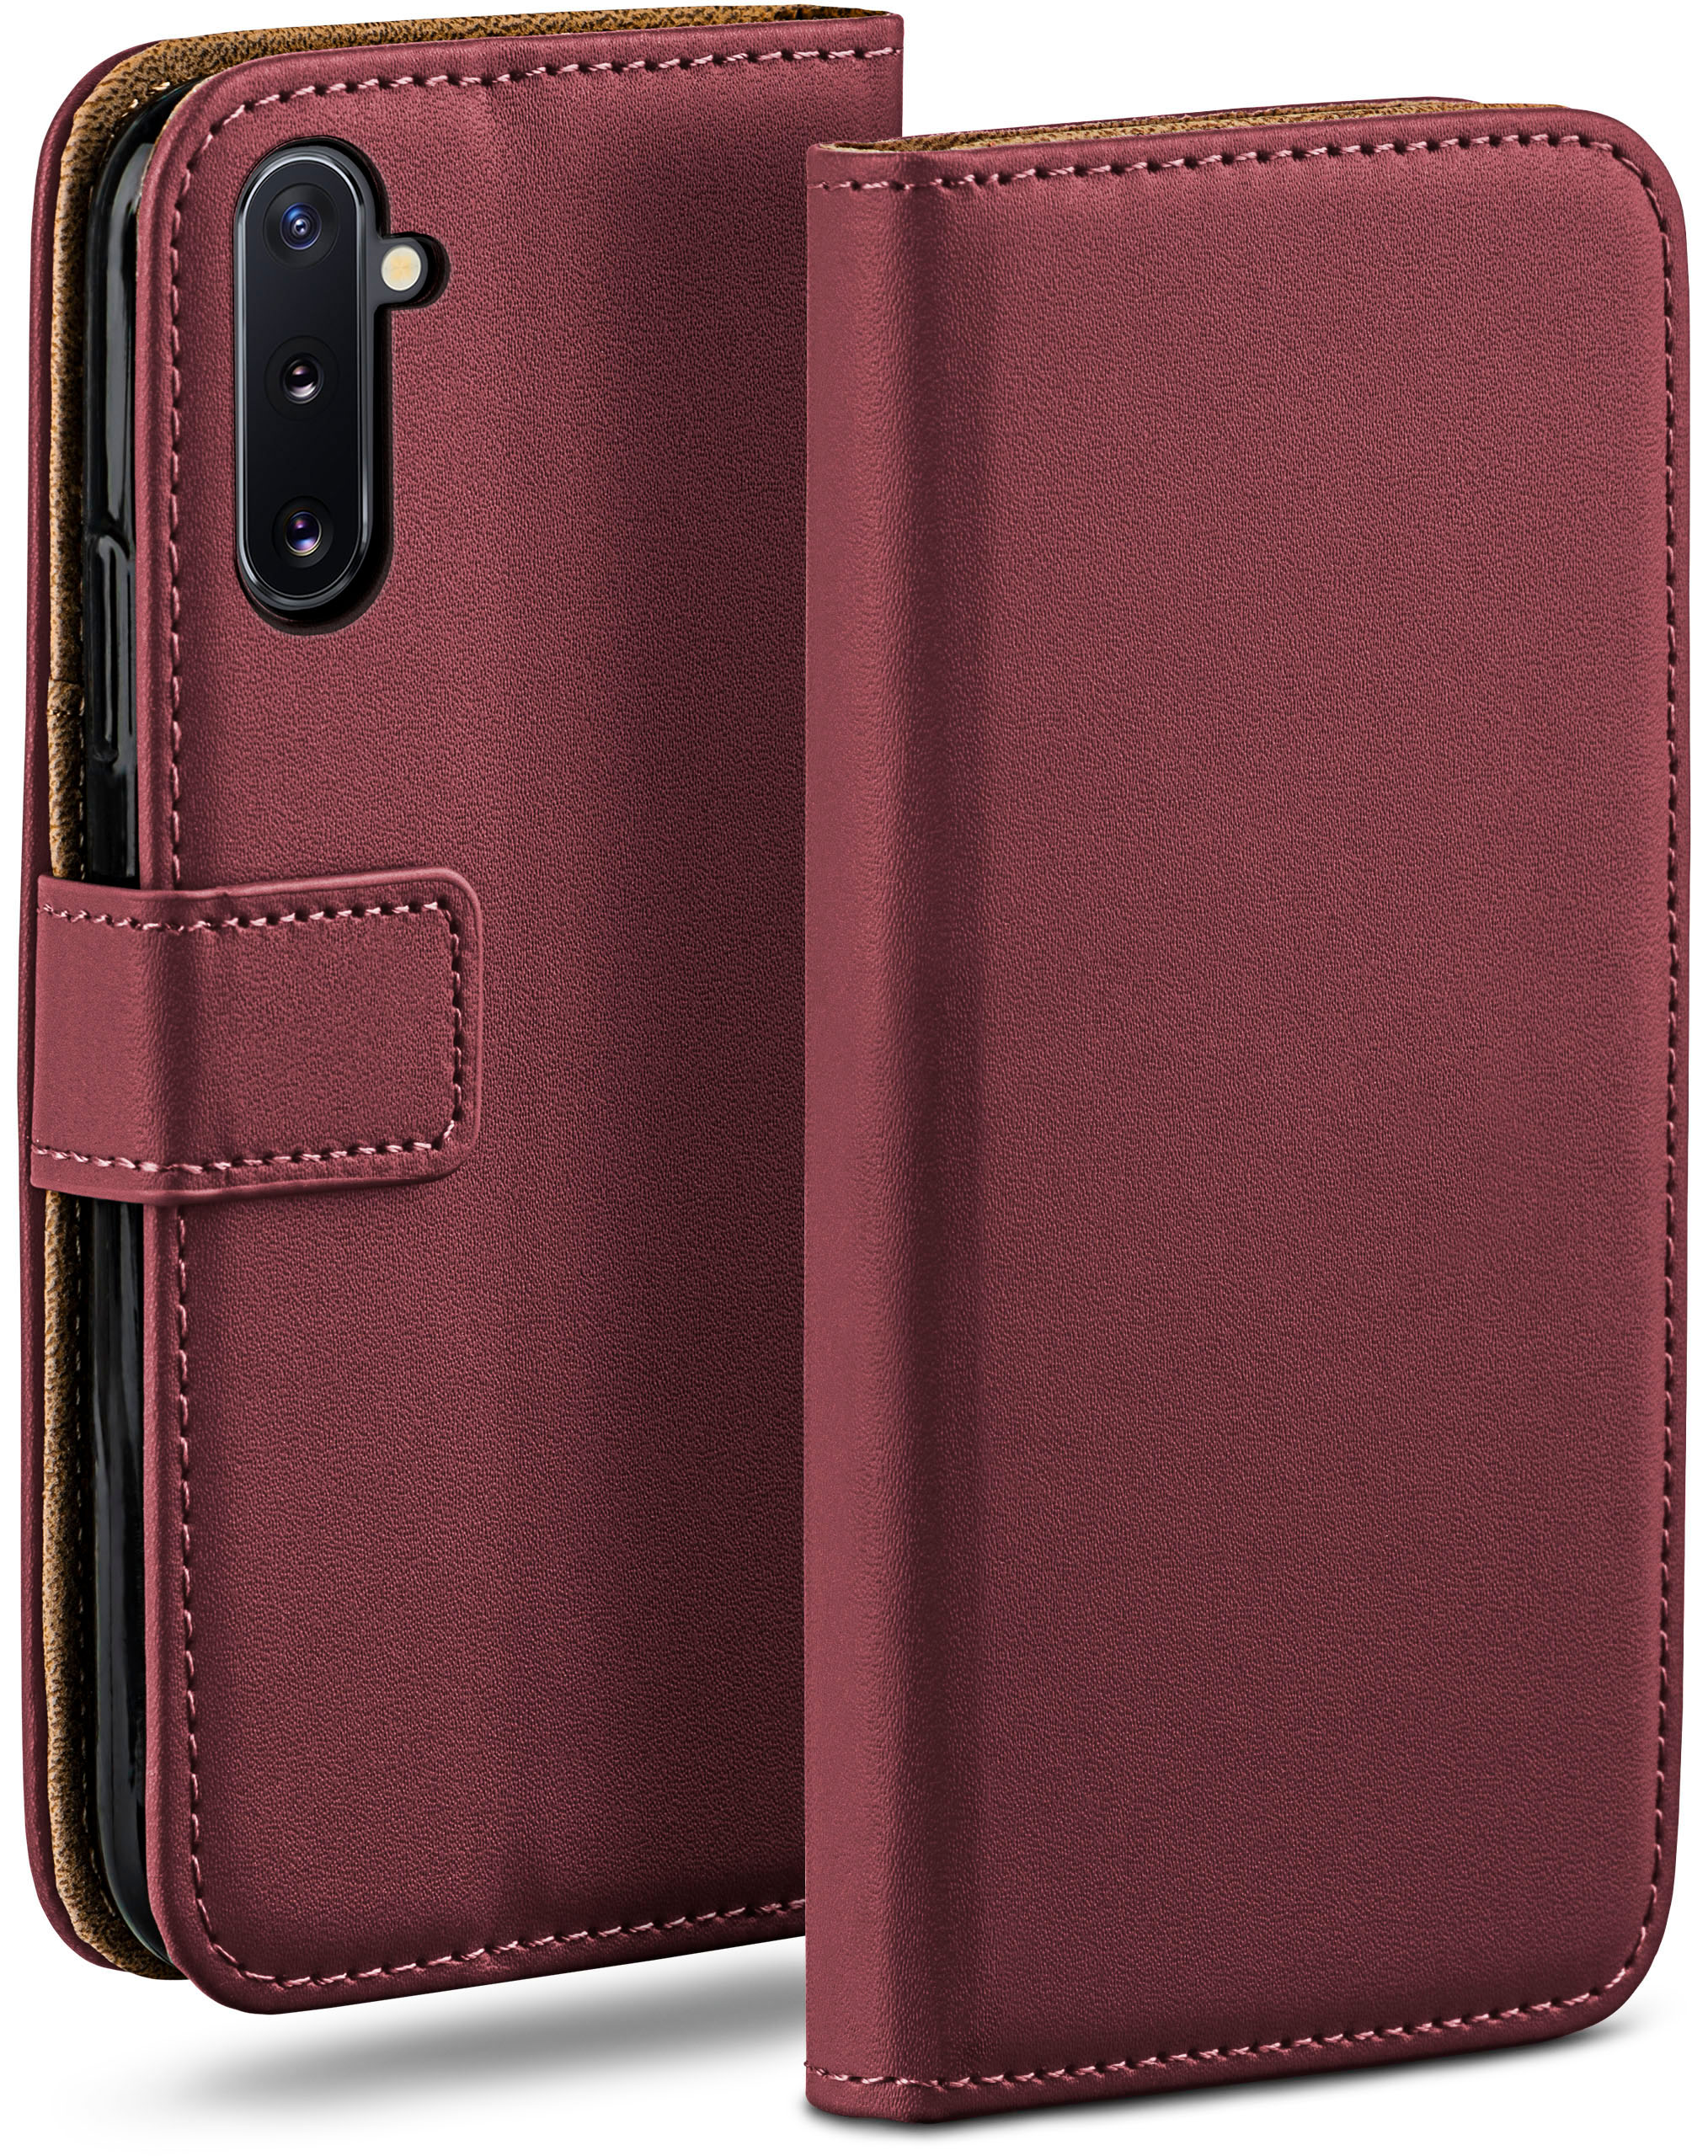 Case, Bookcover, 10, Note Maroon-Red Book MOEX Samsung, Galaxy